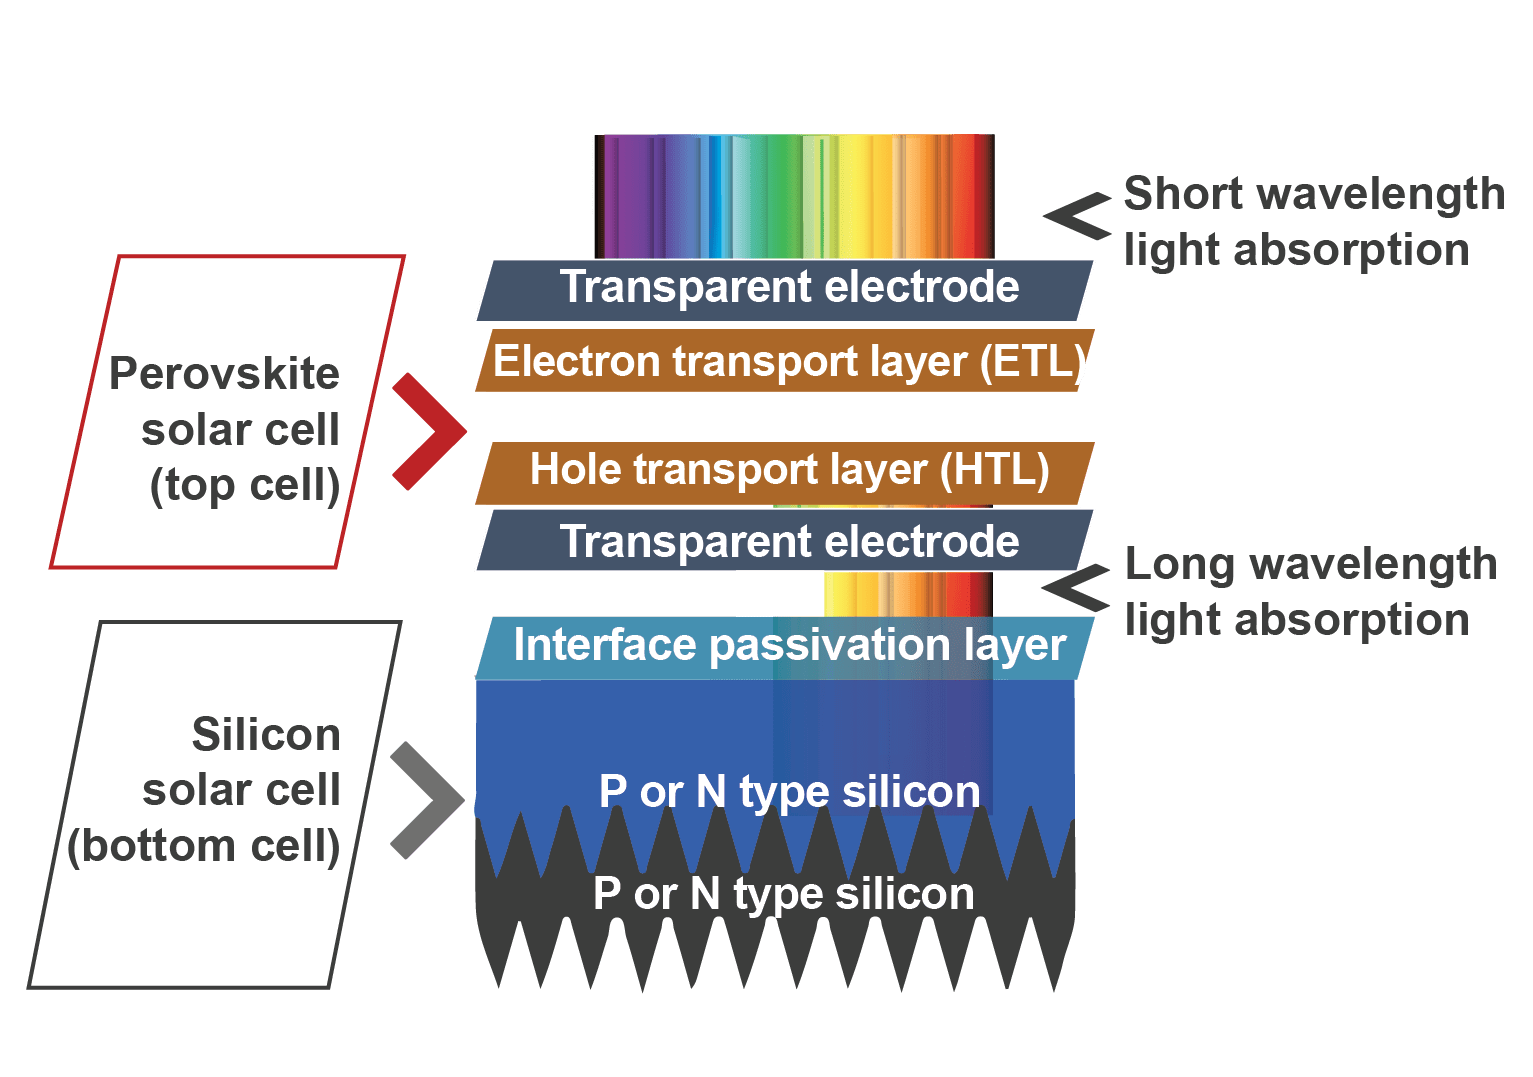 Structure of a perovskite/silicon tandem solar cell with layers. Silicon solar cell (bottom cell): two layers of P or N type silicon, Interface passivation layer. Perovskite solar cell (top cell): transparent electrode, Hole transport layer, transparent electrode